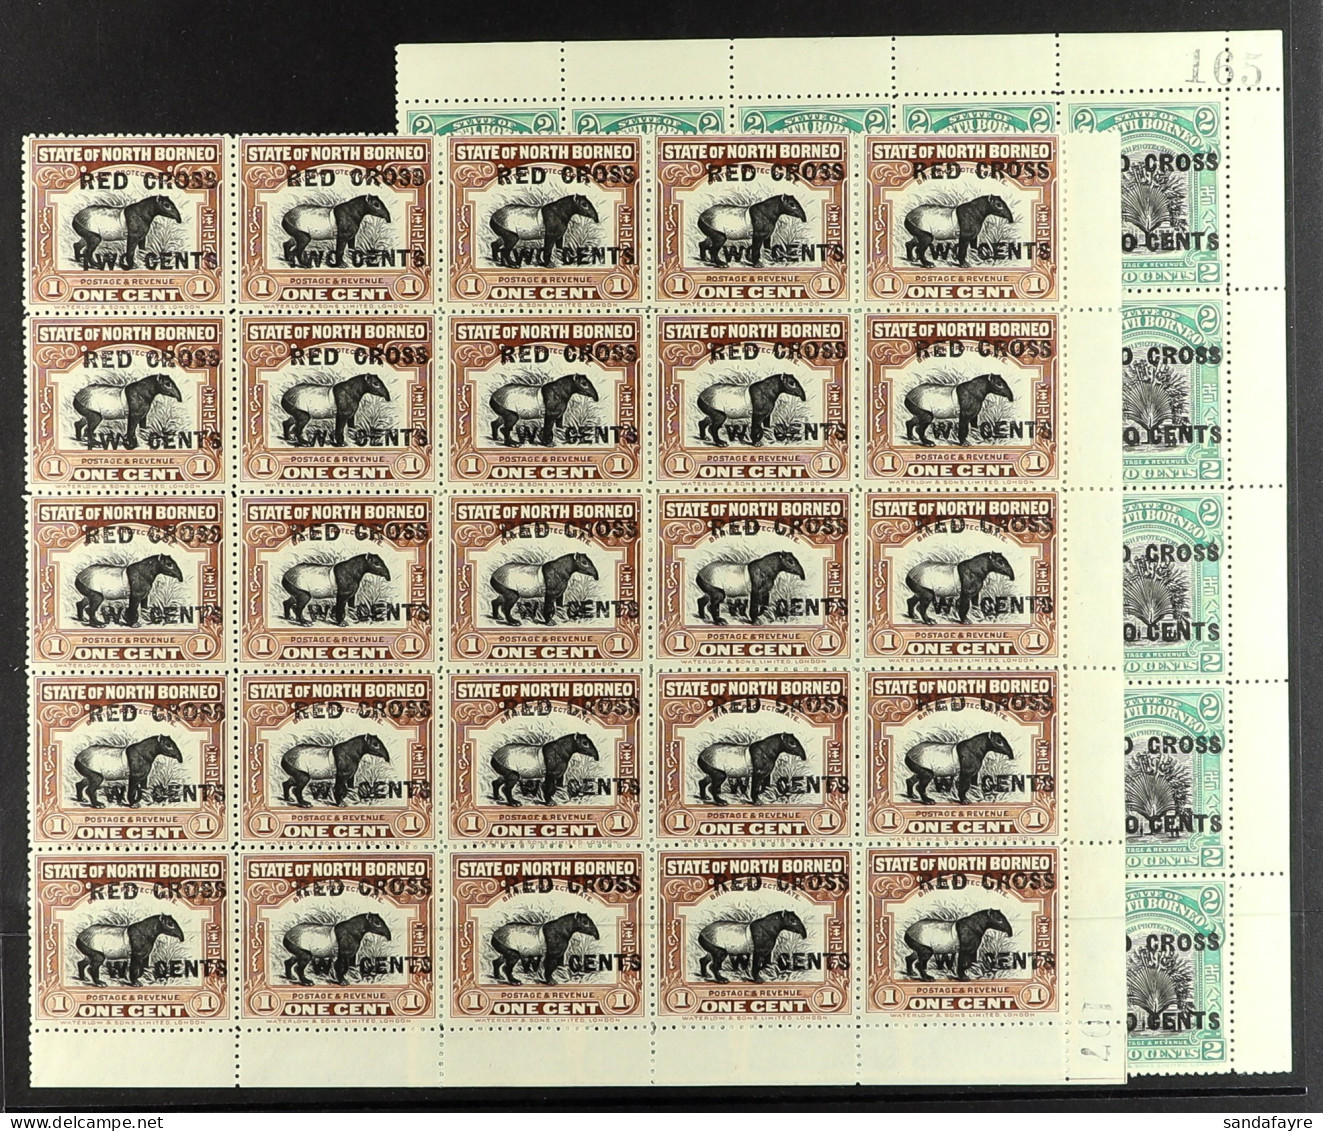 1918 (Aug) 'RED CROSS / TWO CENTS' Surcharges On 1c, 2c, 3c, 4c, 5c, 6c, 8c And 10c (SG 214-223), Each A Block Of 25 Fro - North Borneo (...-1963)